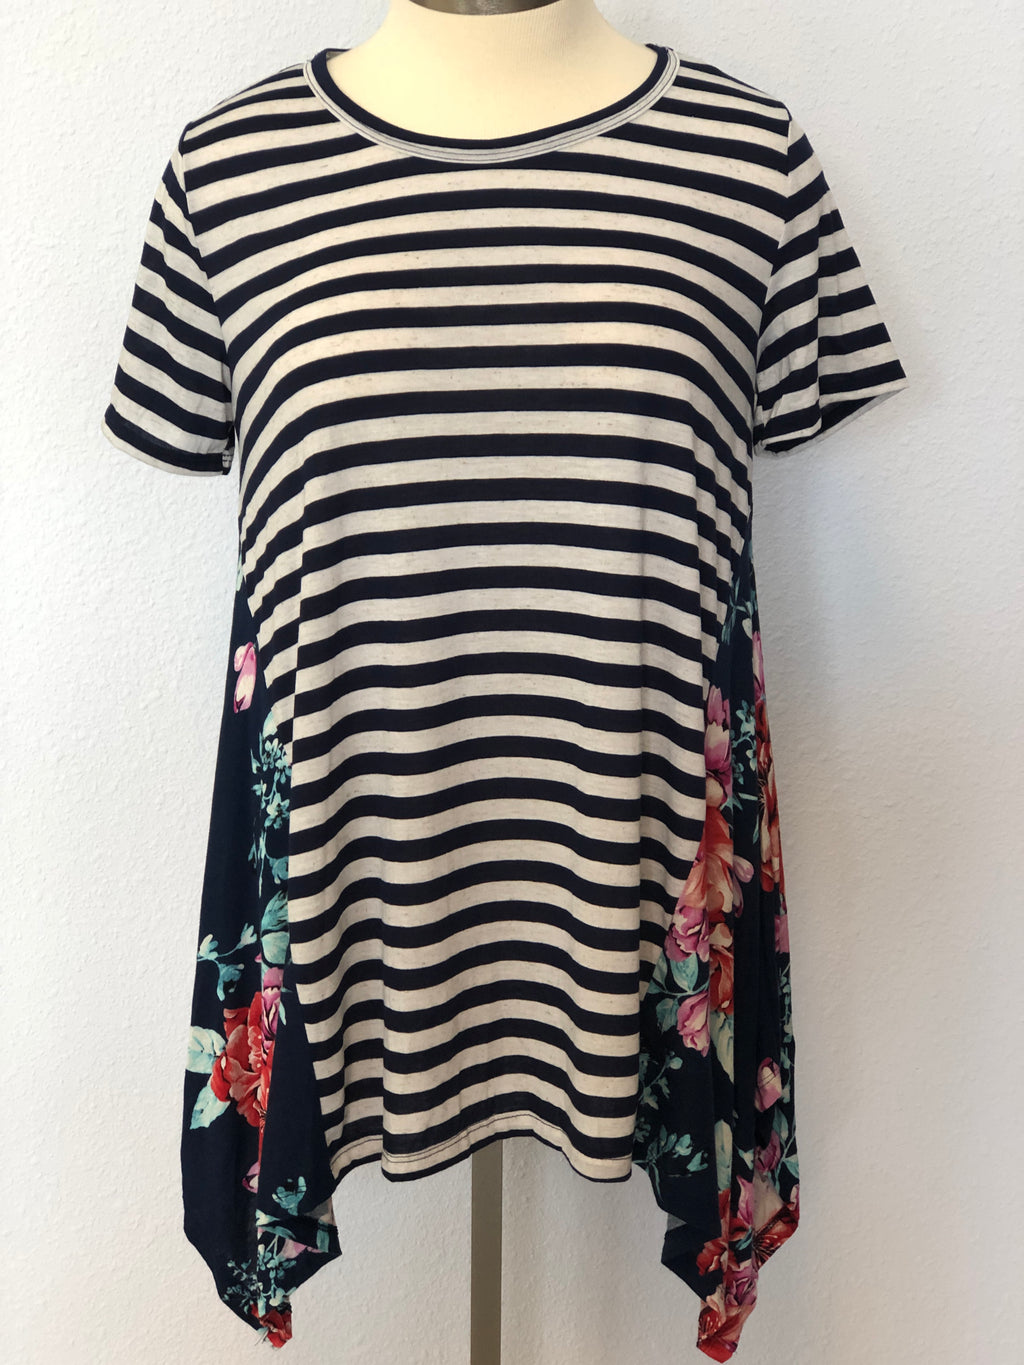 STRIPED FLORAL SWING TOP